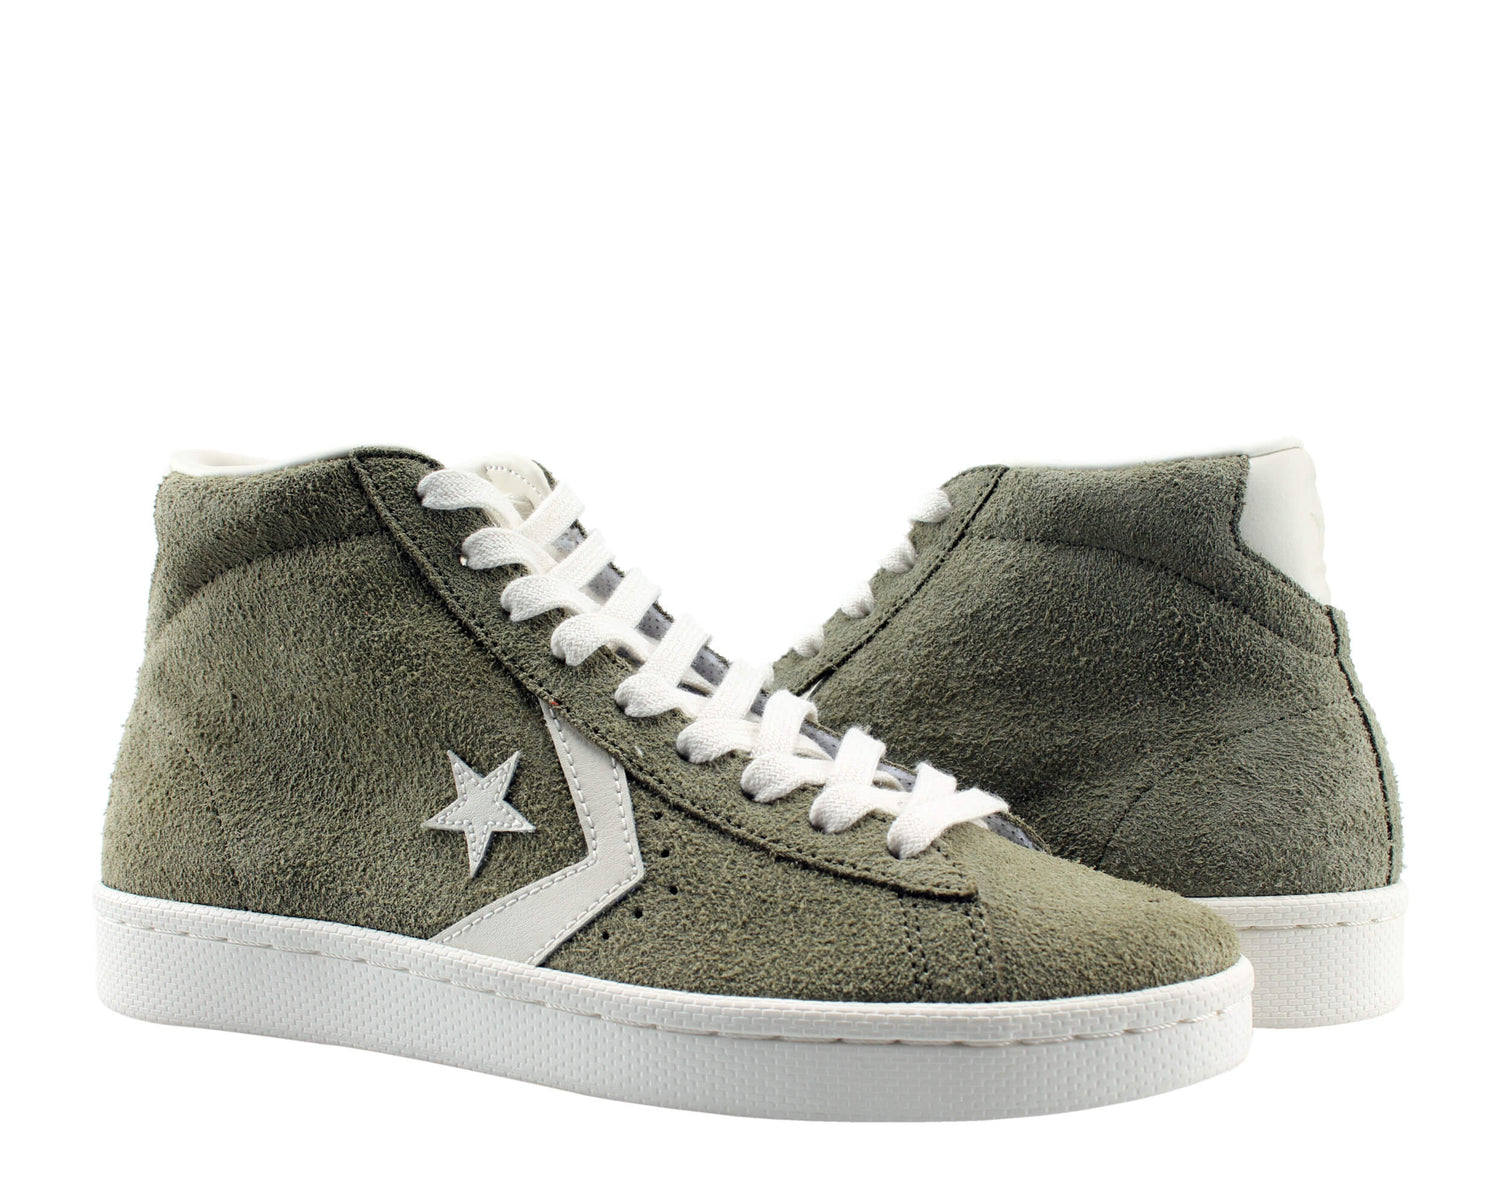 Converse Pro Leather Mid Men's Sneakers